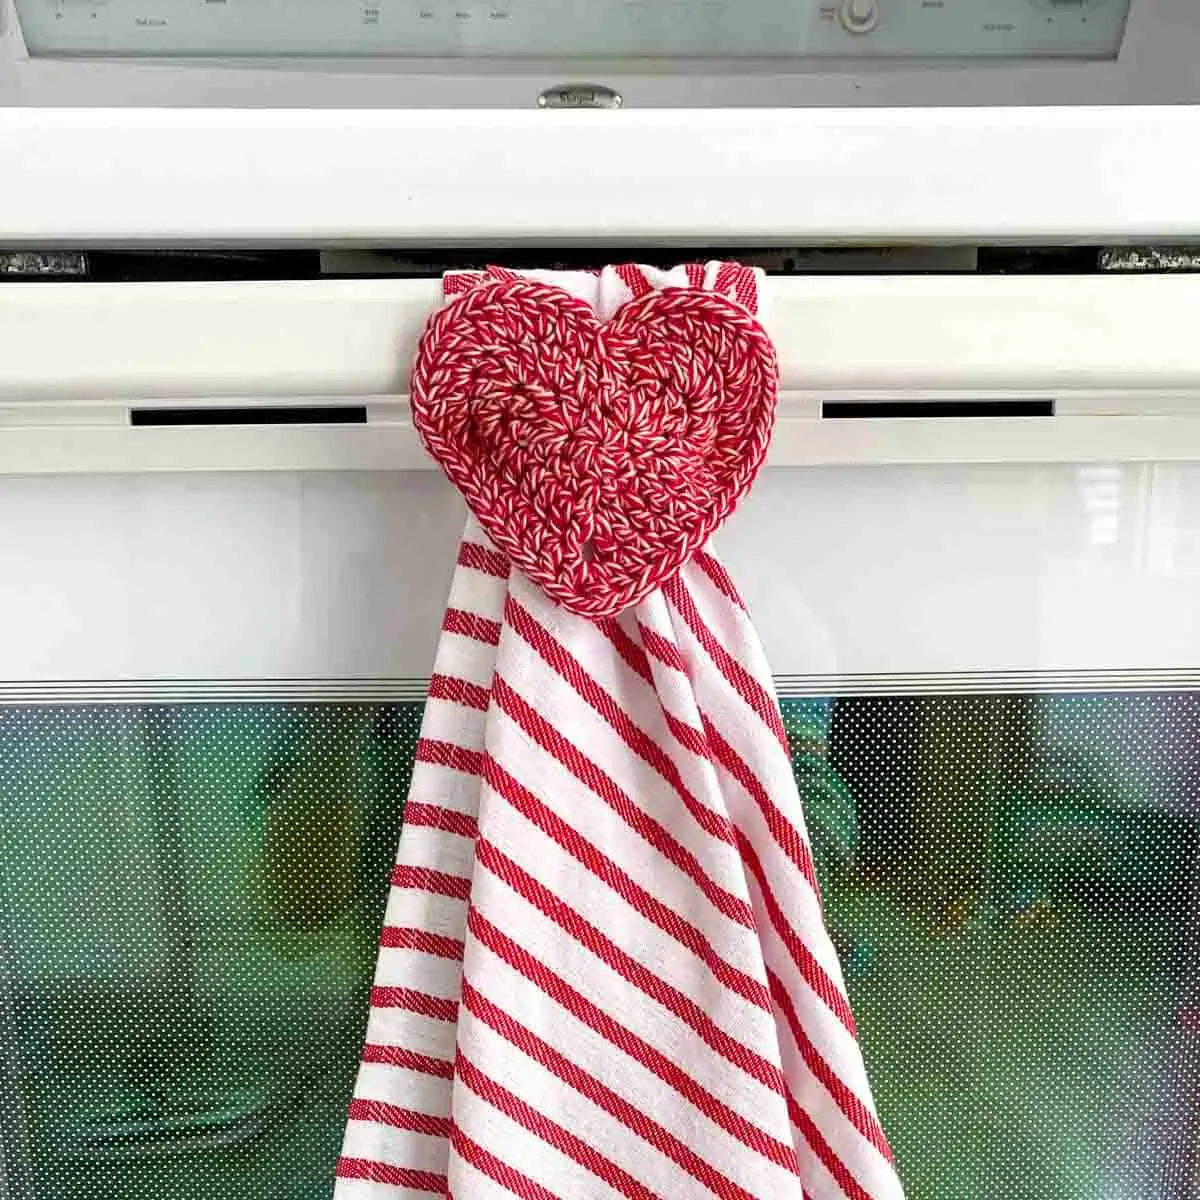 red and white striped tea towel with a crochet heart hanger hanging on an oven handle